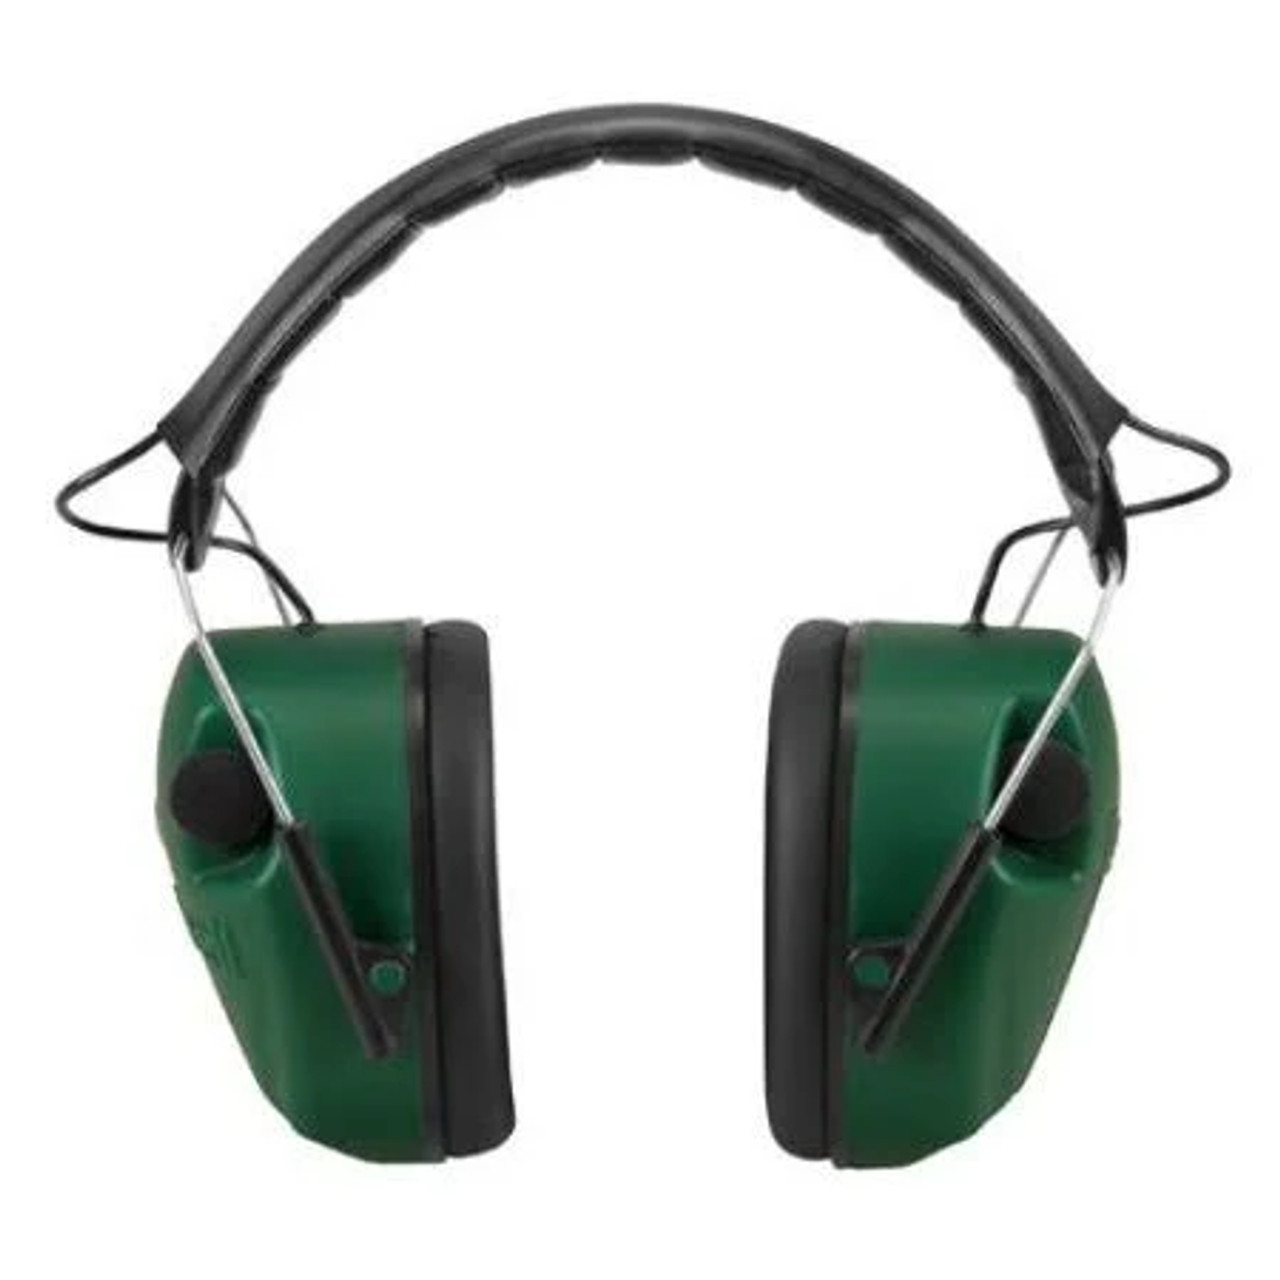 E-Max Electronic Hearing Protection
The Caldwell® E-Max® hearing protection combines great circuitry with a standard earcup for better protection. The two microphones in the E-Max amplify sounds below 85 decibels, which amplifies normal communication, range commands, and environmental sounds. Above 85 decibels, the microphones shut off to protect the shooter's hearing. Ear cup width is 1.75 inches and two AAA batteries are required but not included. Enabled with one stereo microphone in each cup, the user can localize sound from all directions. 25dB Noise Reduction Rating.
